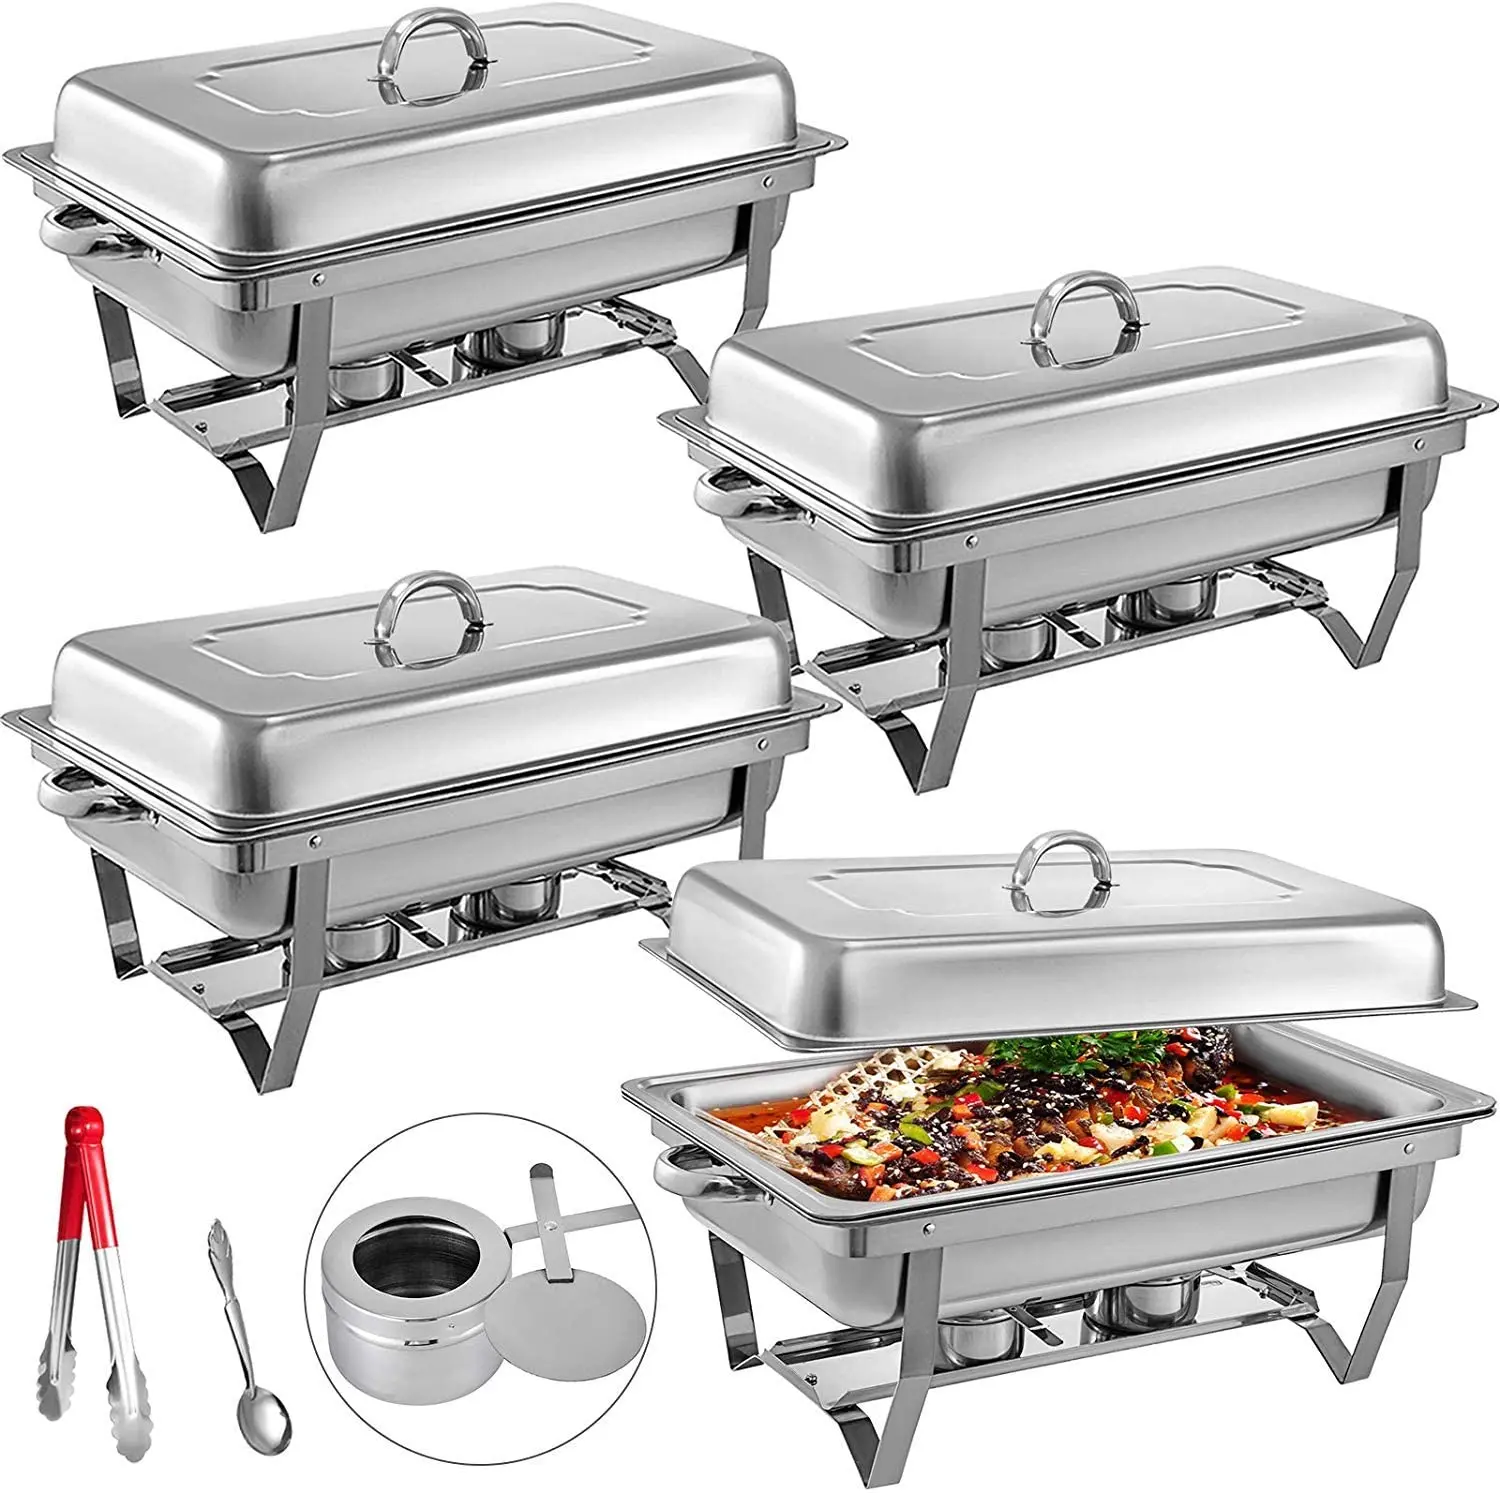 9L Chafing Dish 8Quart Stainless Steel Rectangular Chafer Full Size Buffet Stove 